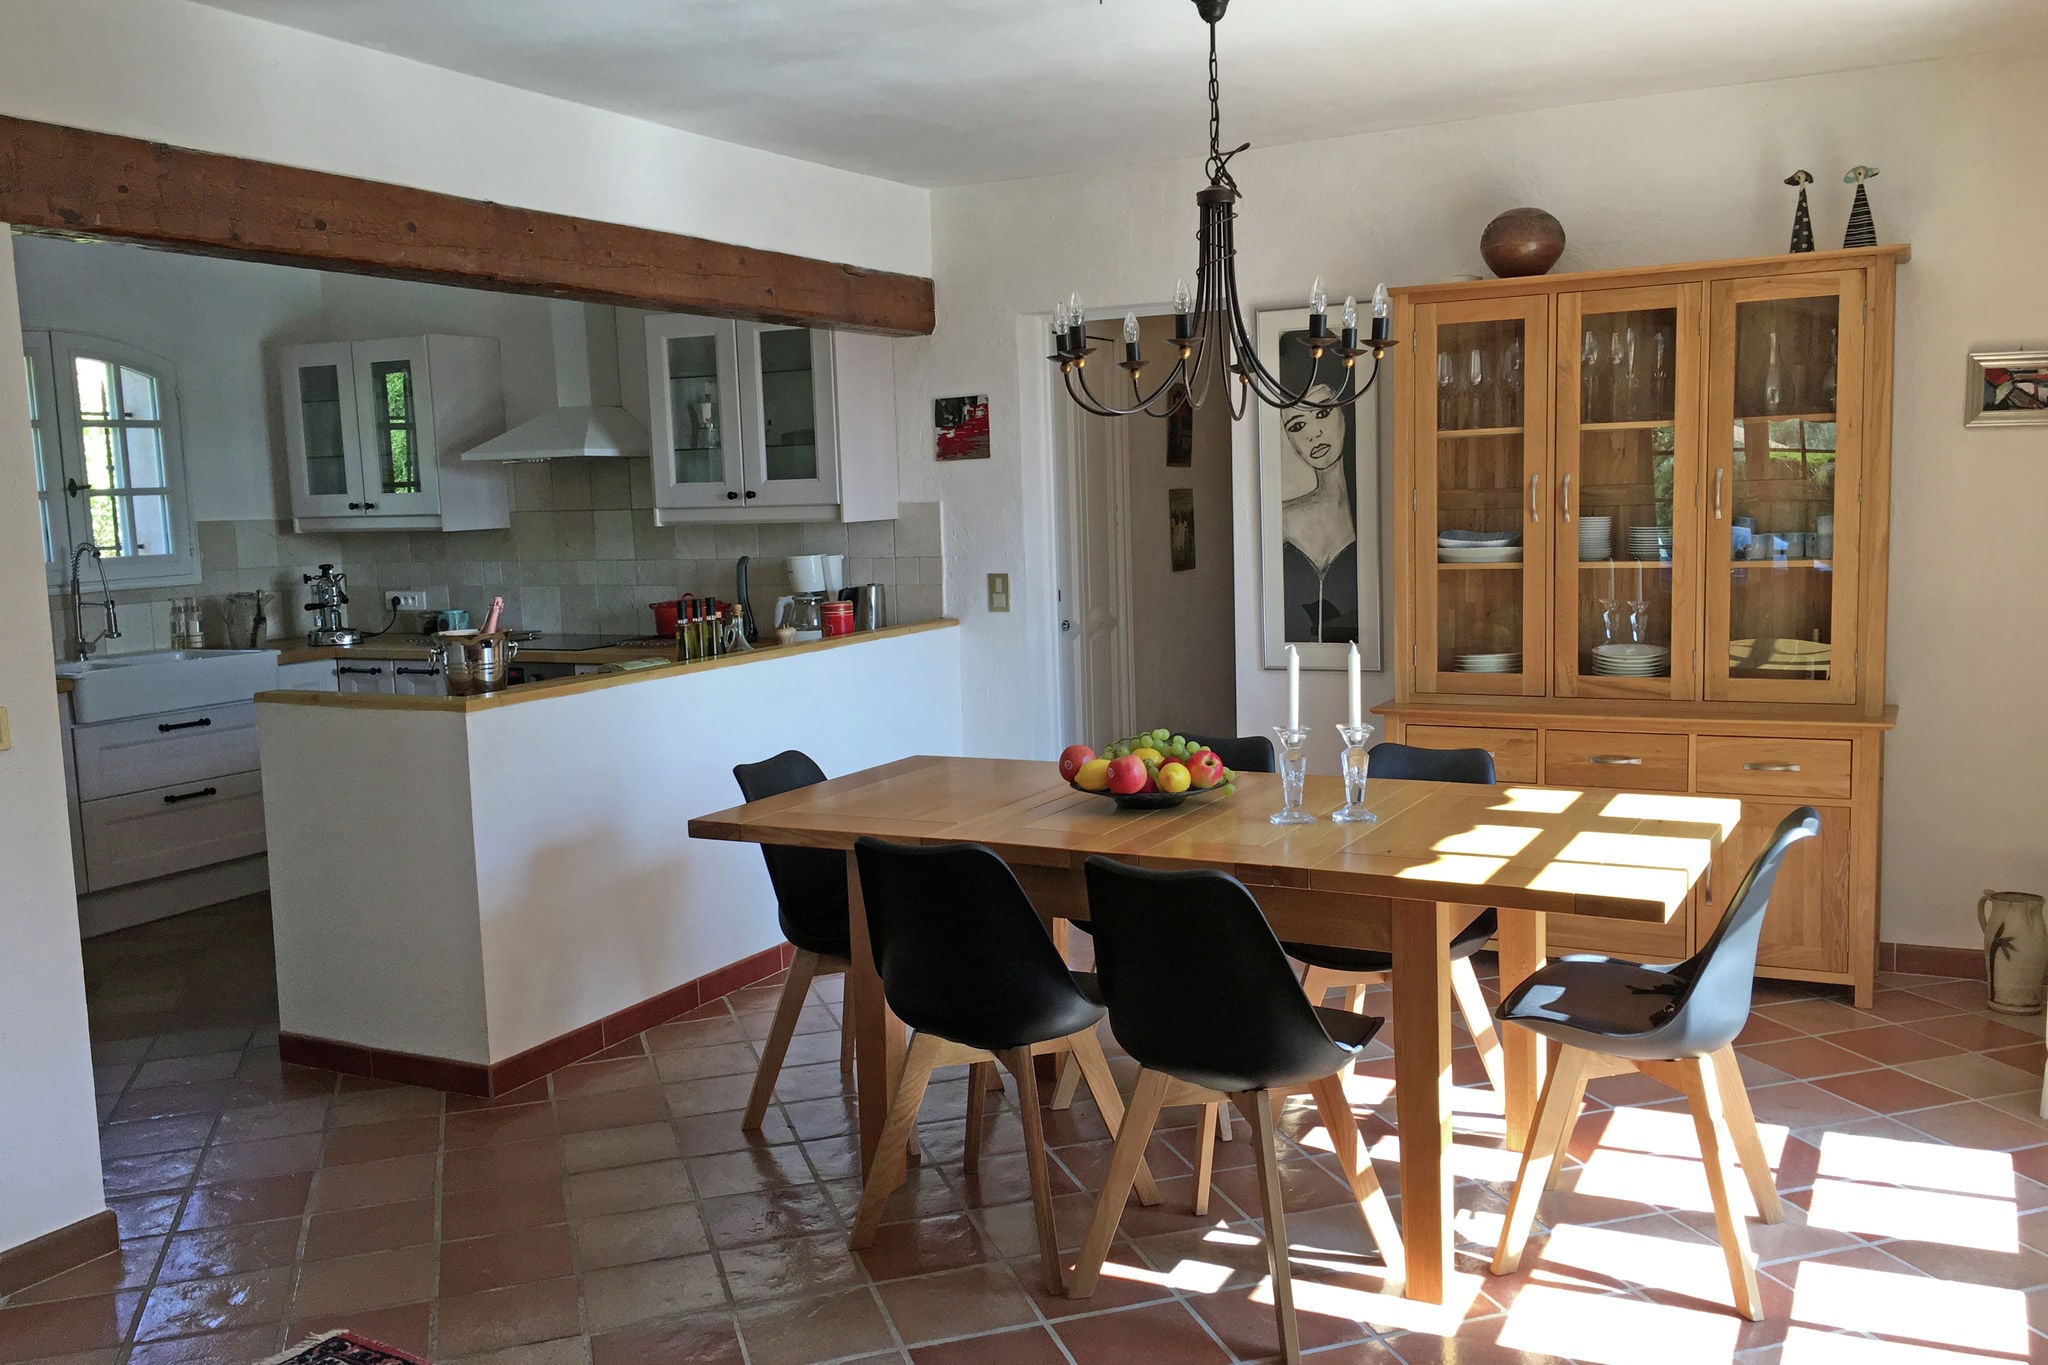 Detached villa with private pool and wide view, near the village of Lorgues